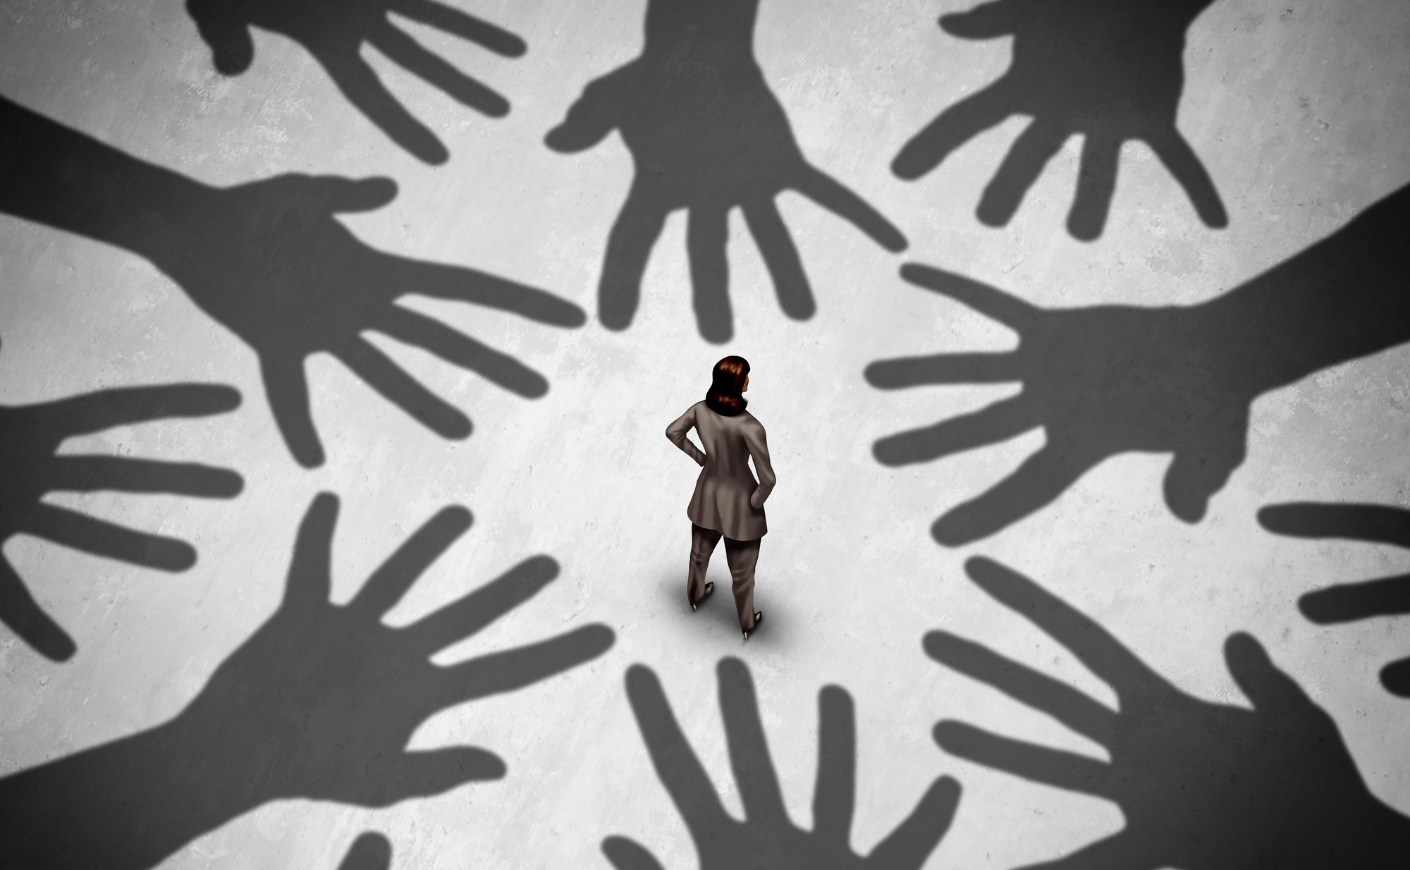 Illustration of a woman standing amid the threatening shadows of hands reaching out for her